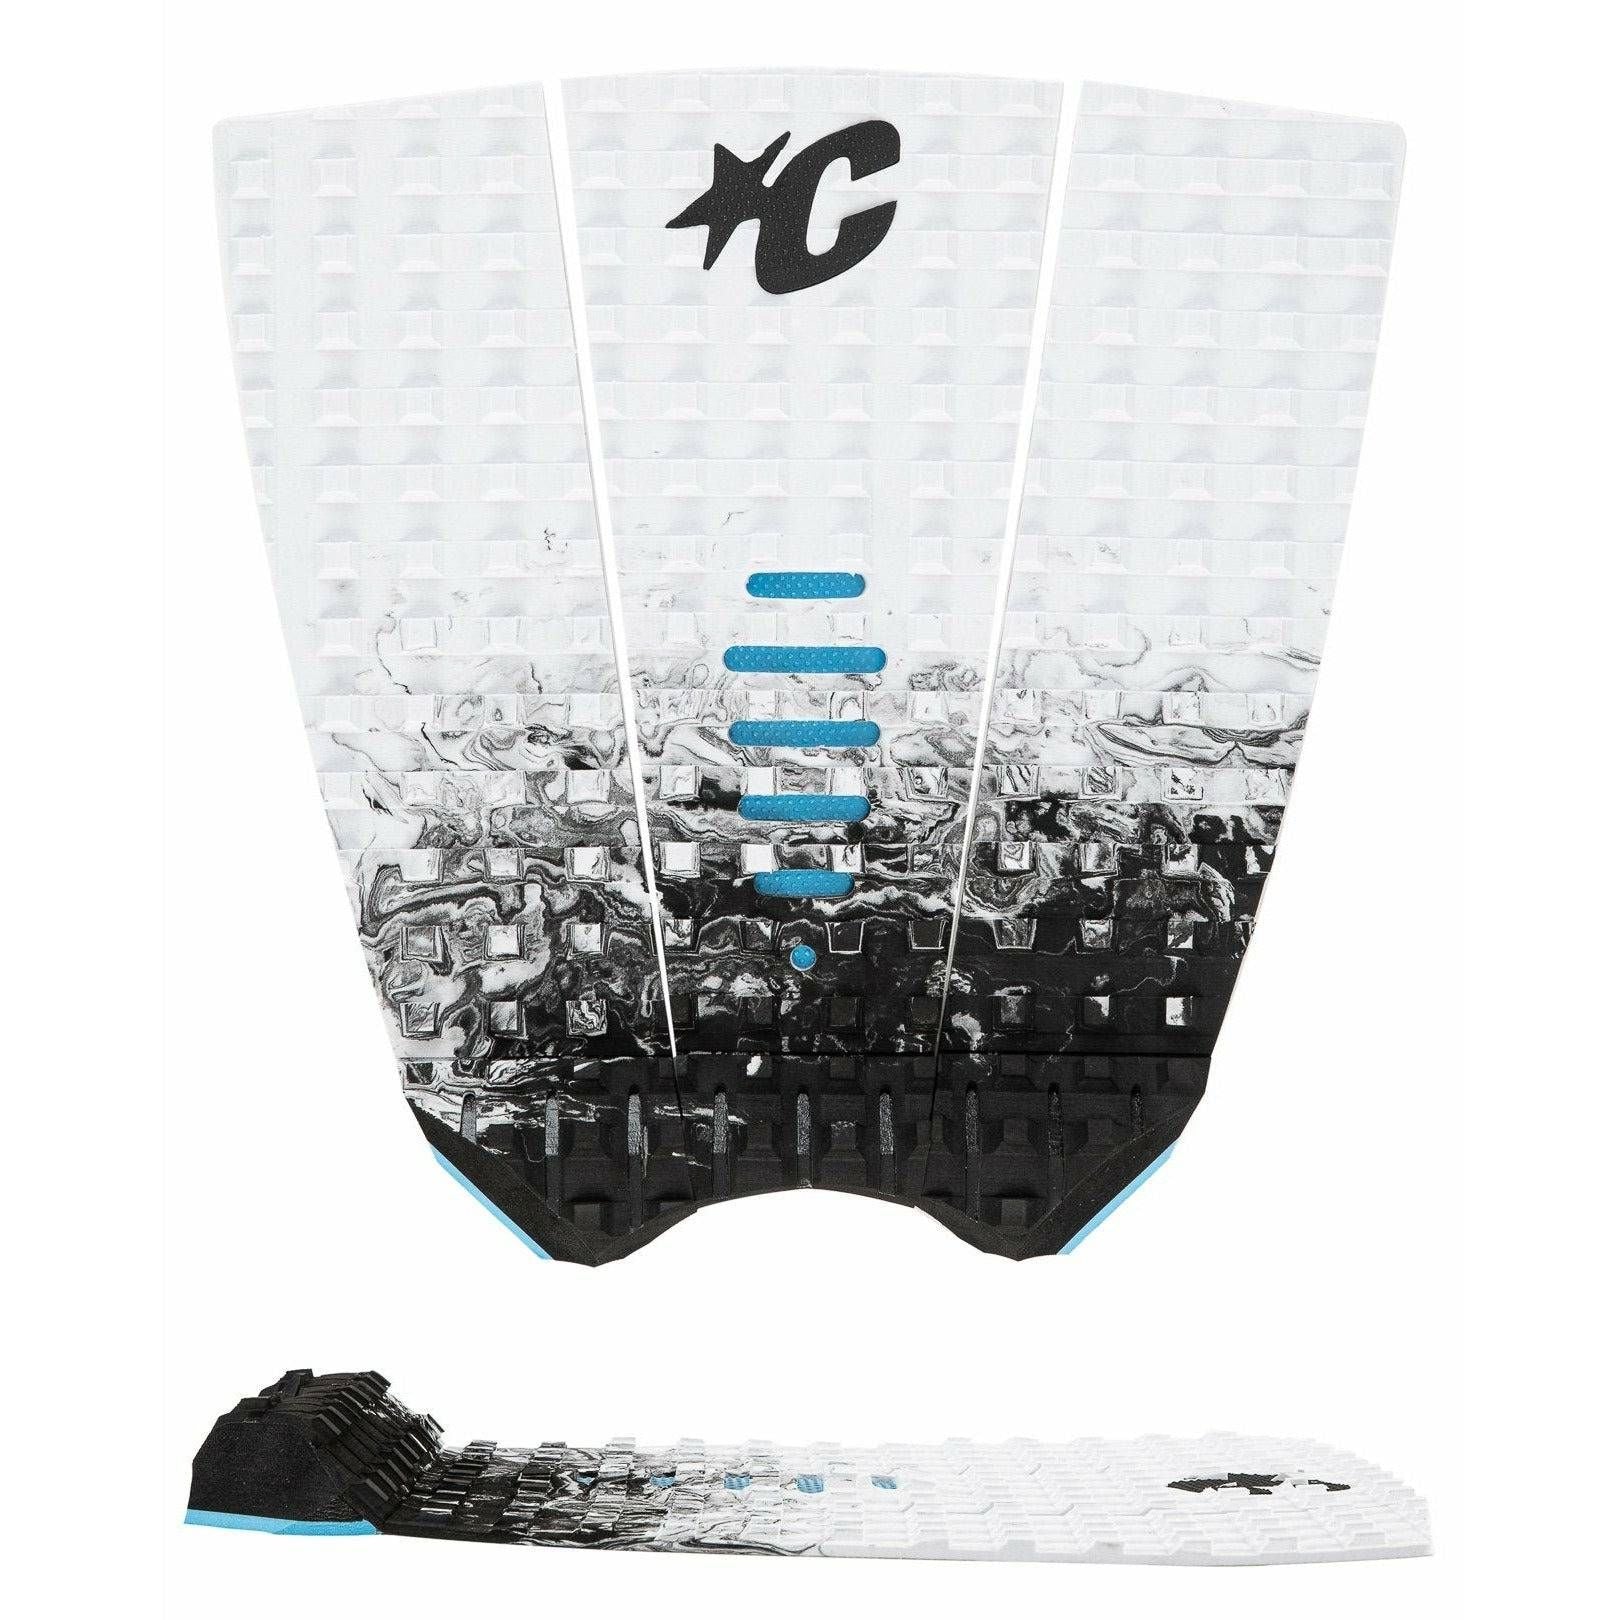 CREATURES OF LEISURE Mick Fanning Performance Traction - Basham's Factory & Surf Shop